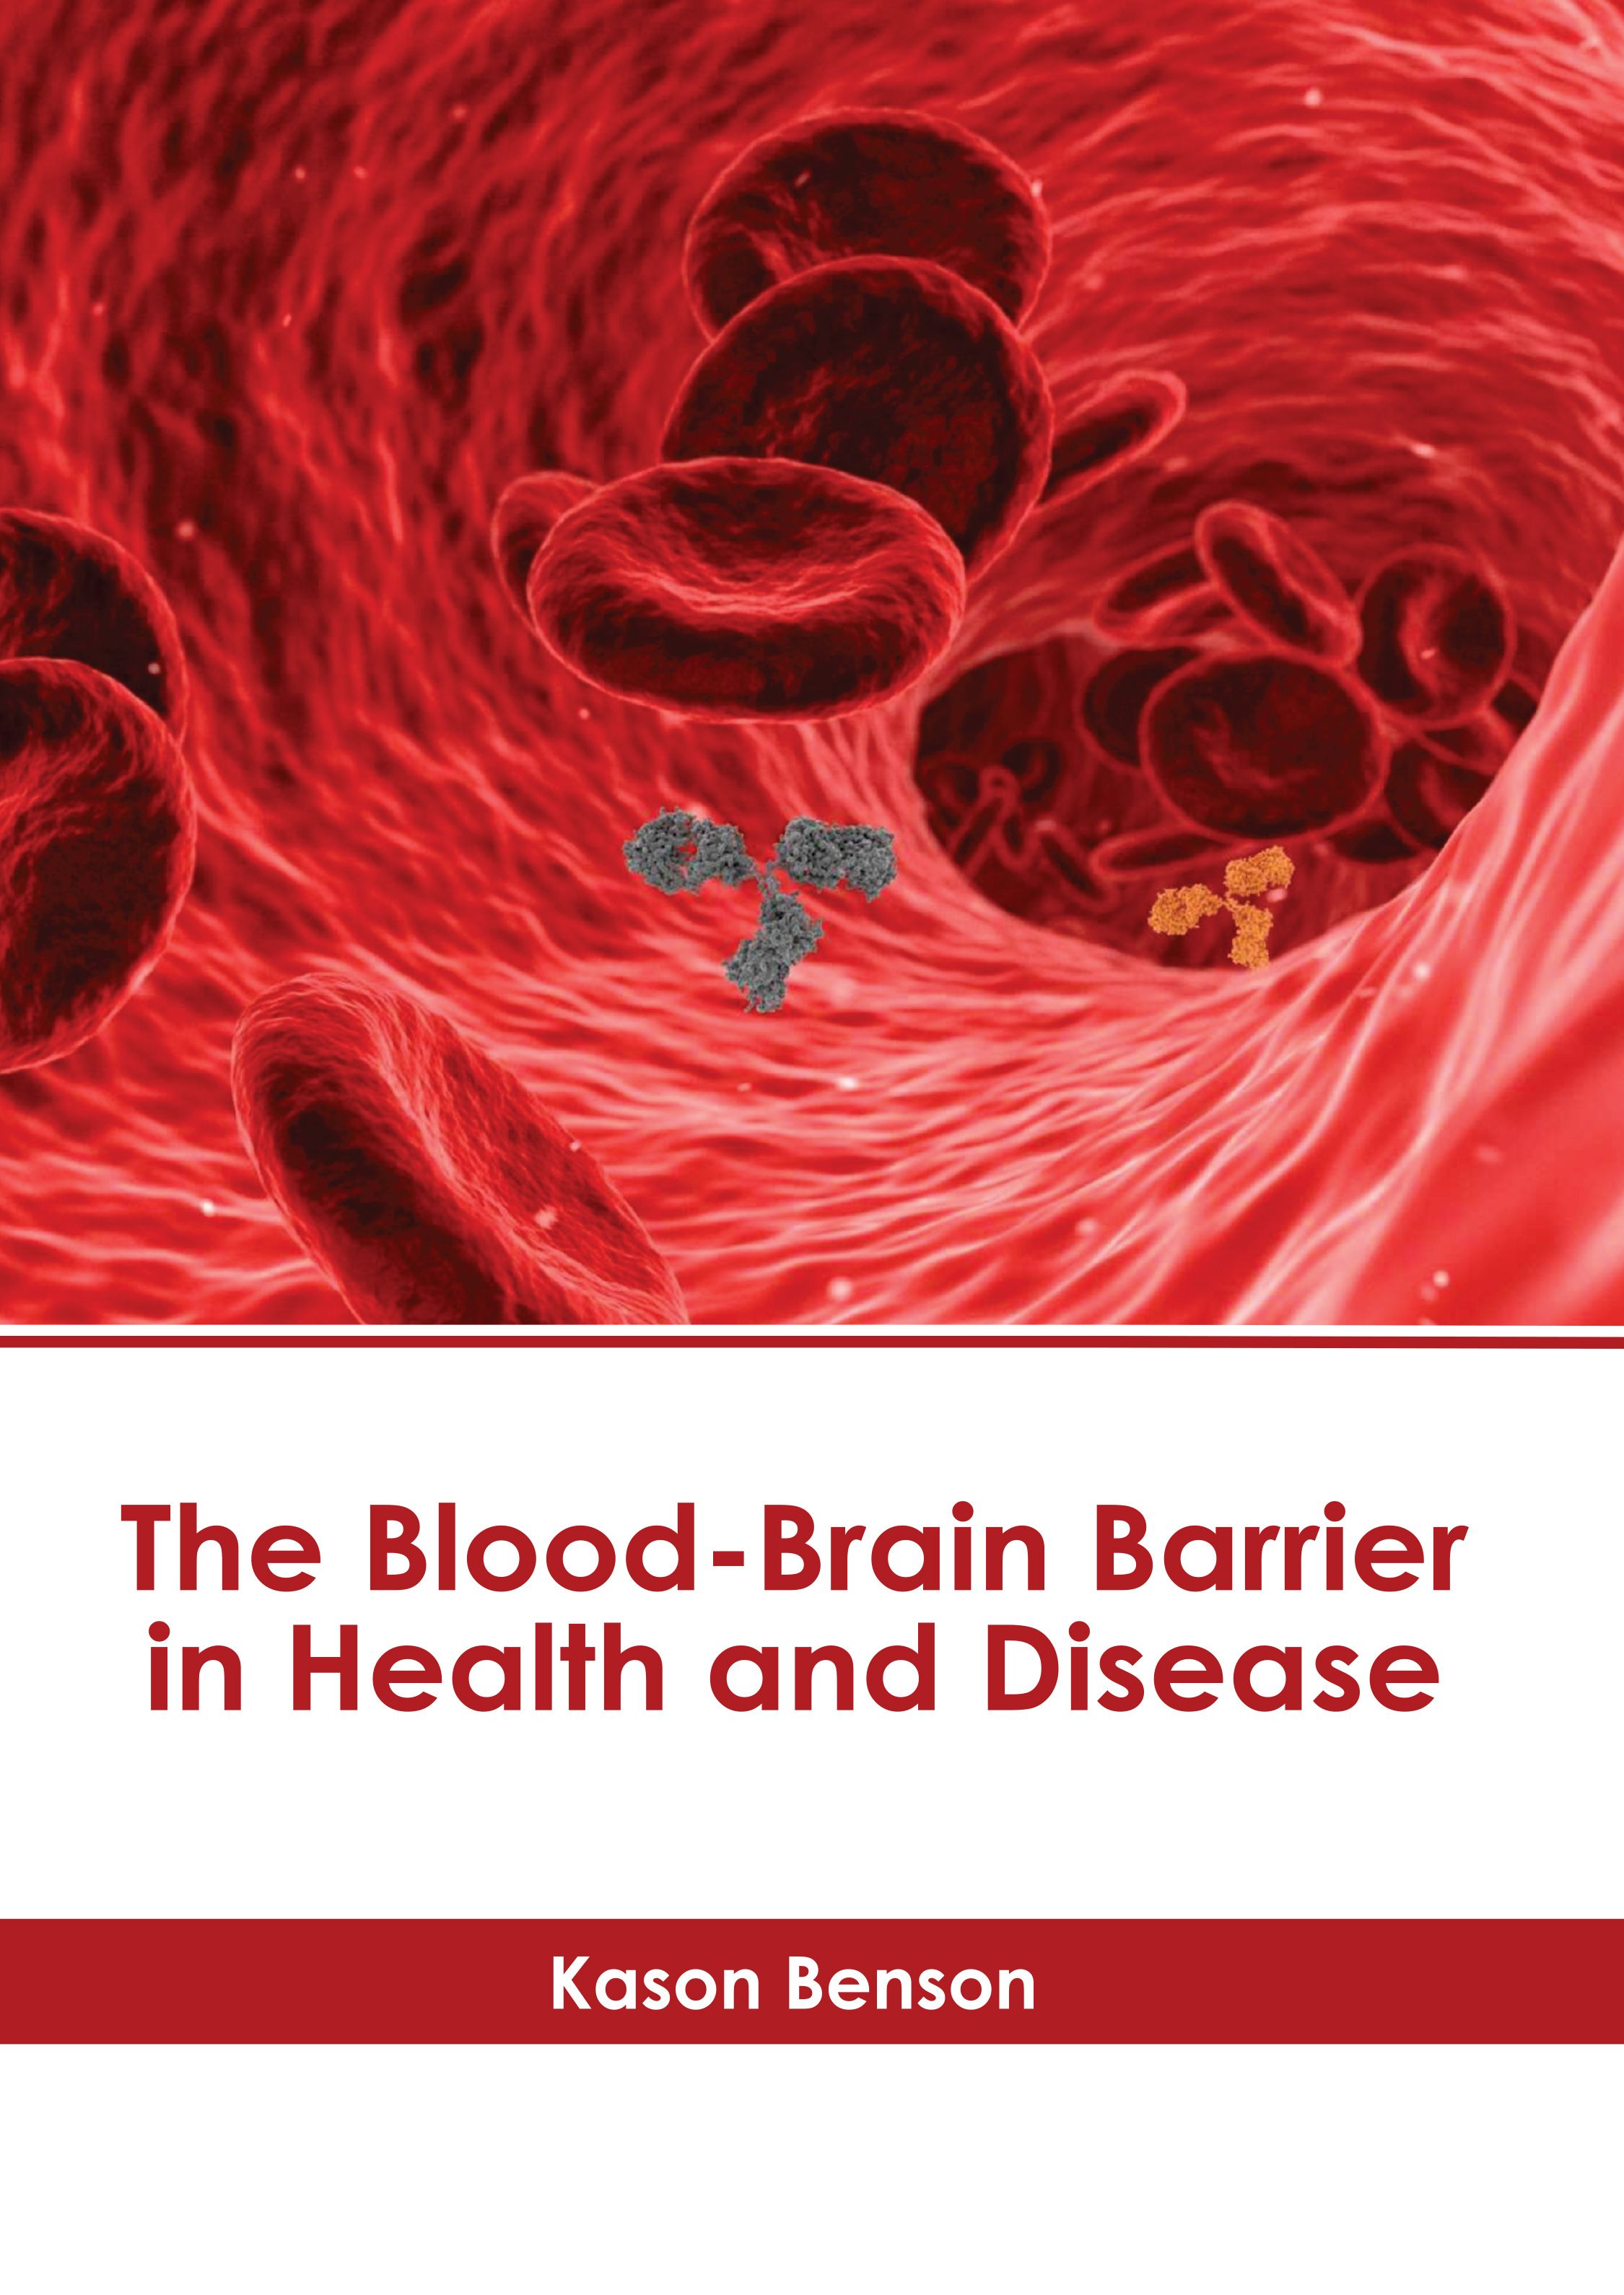 THE BLOOD-BRAIN BARRIER IN HEALTH AND DISEASE